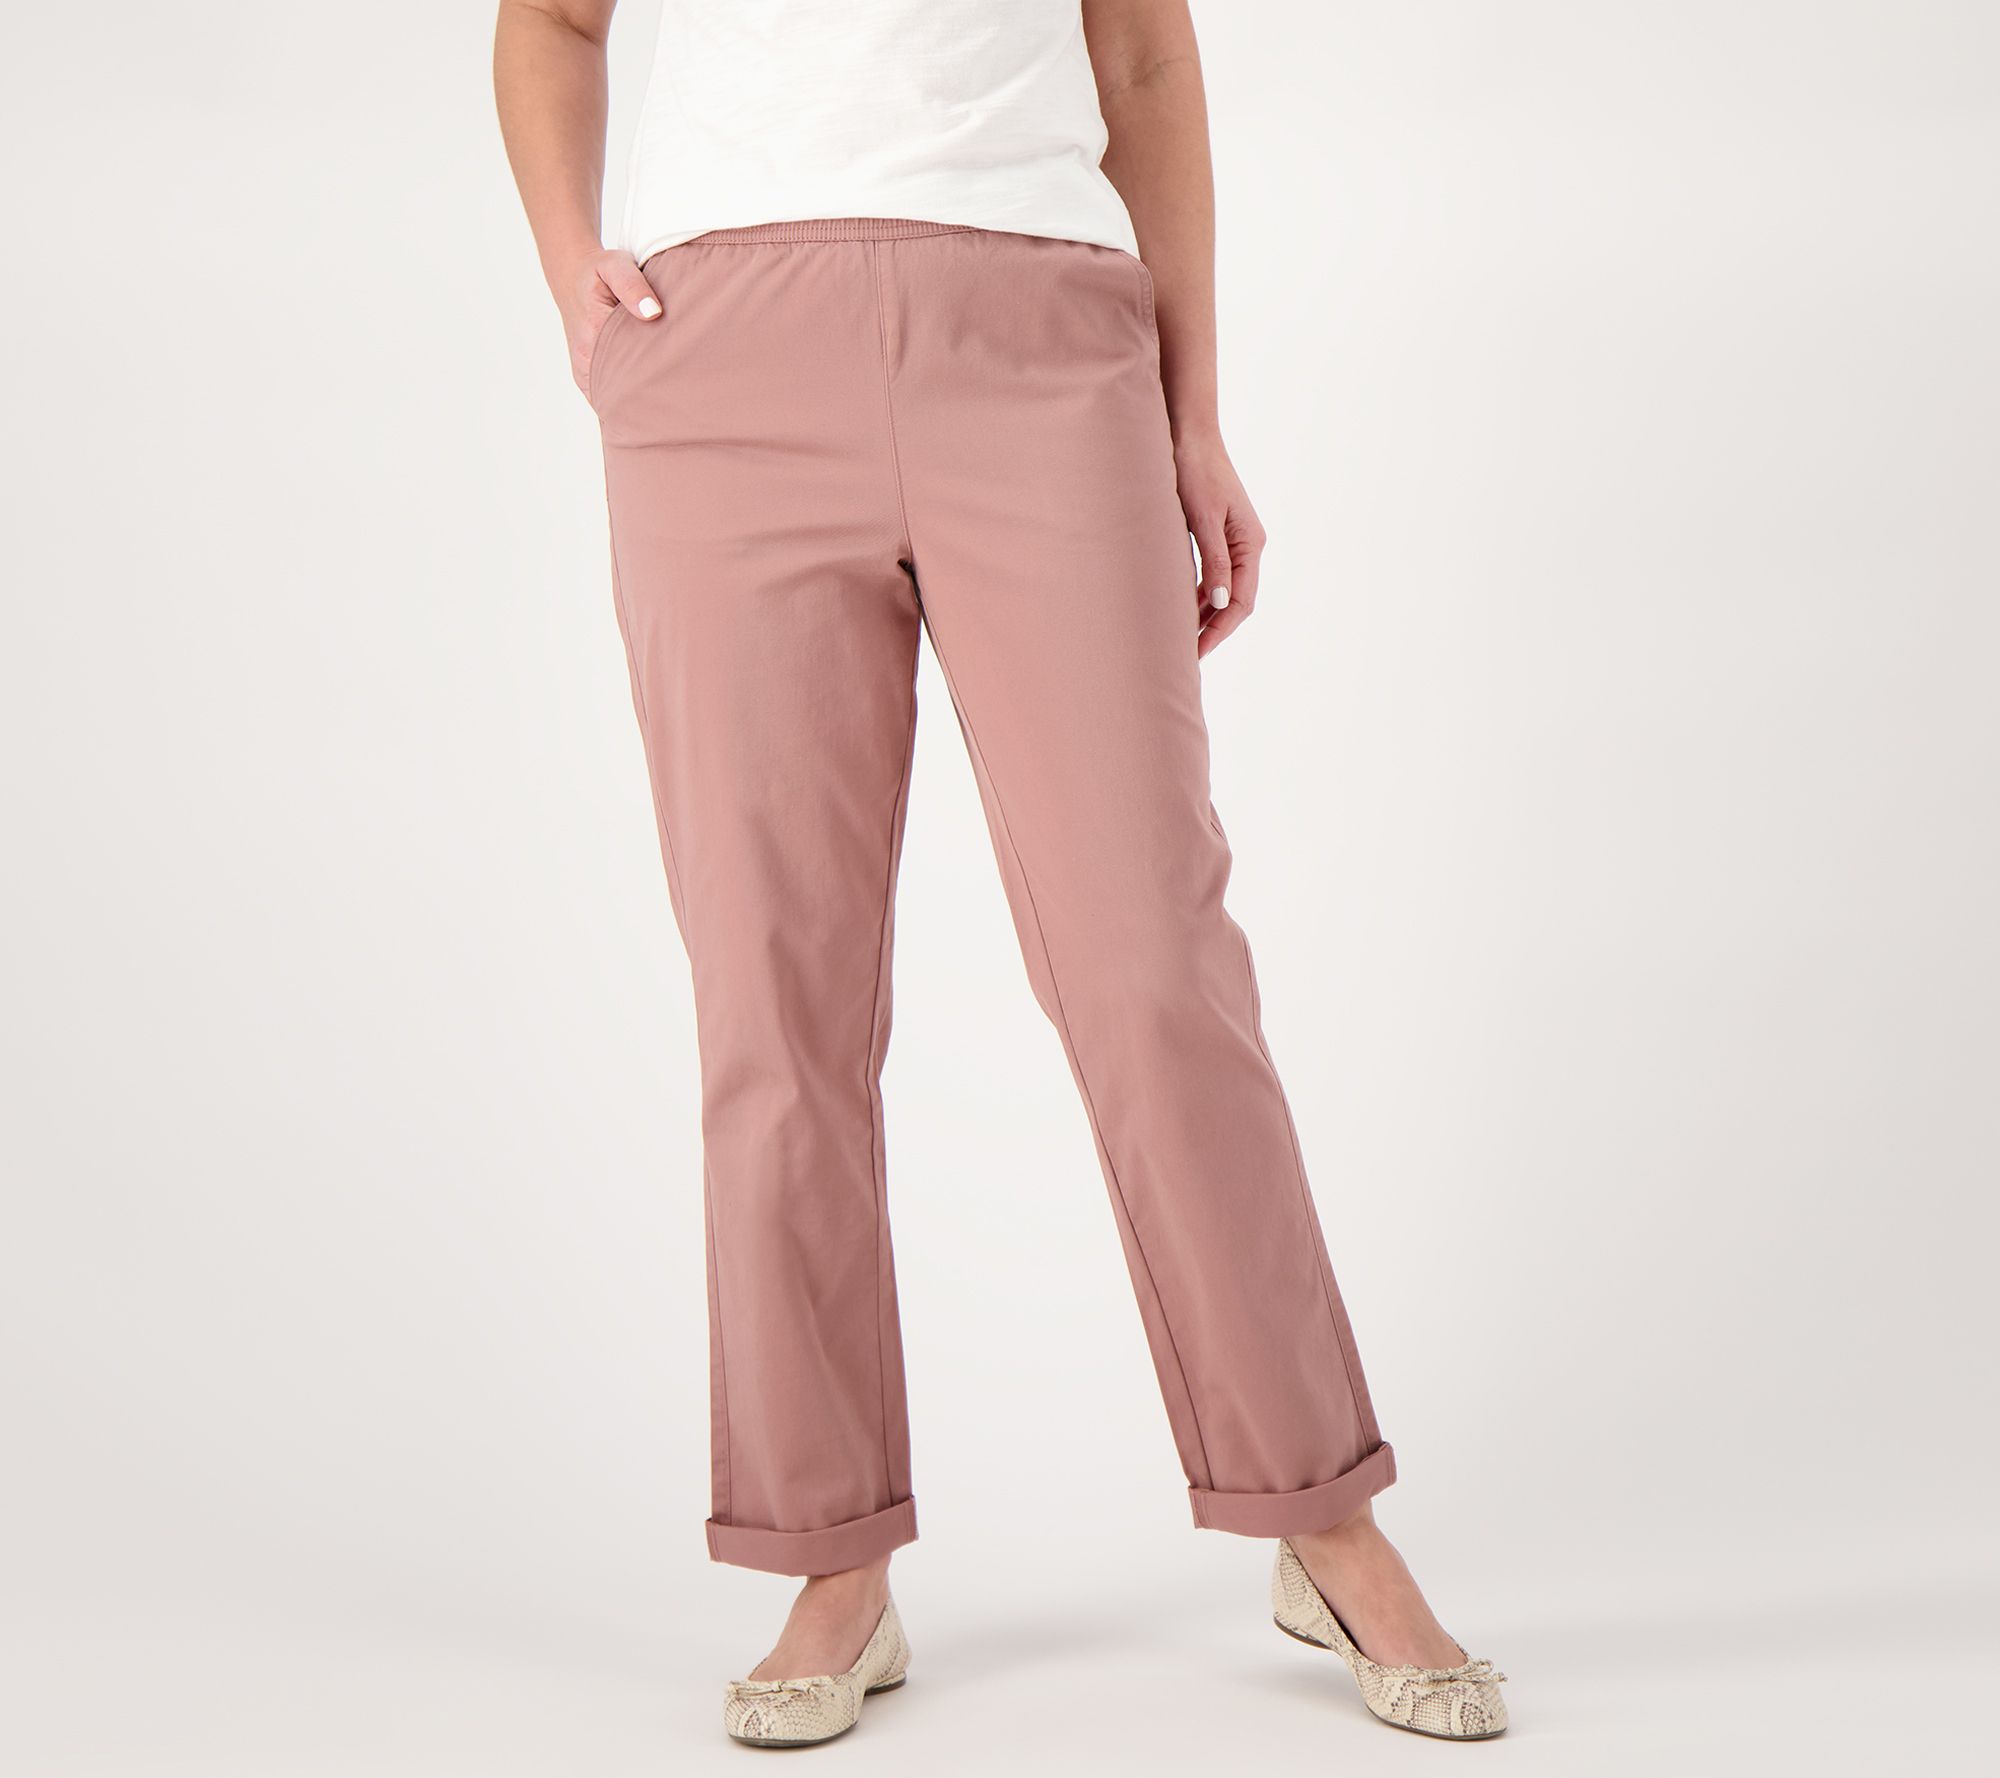 Denim & Co. Tall EasyWear Twill Relaxed Pull On Pant 